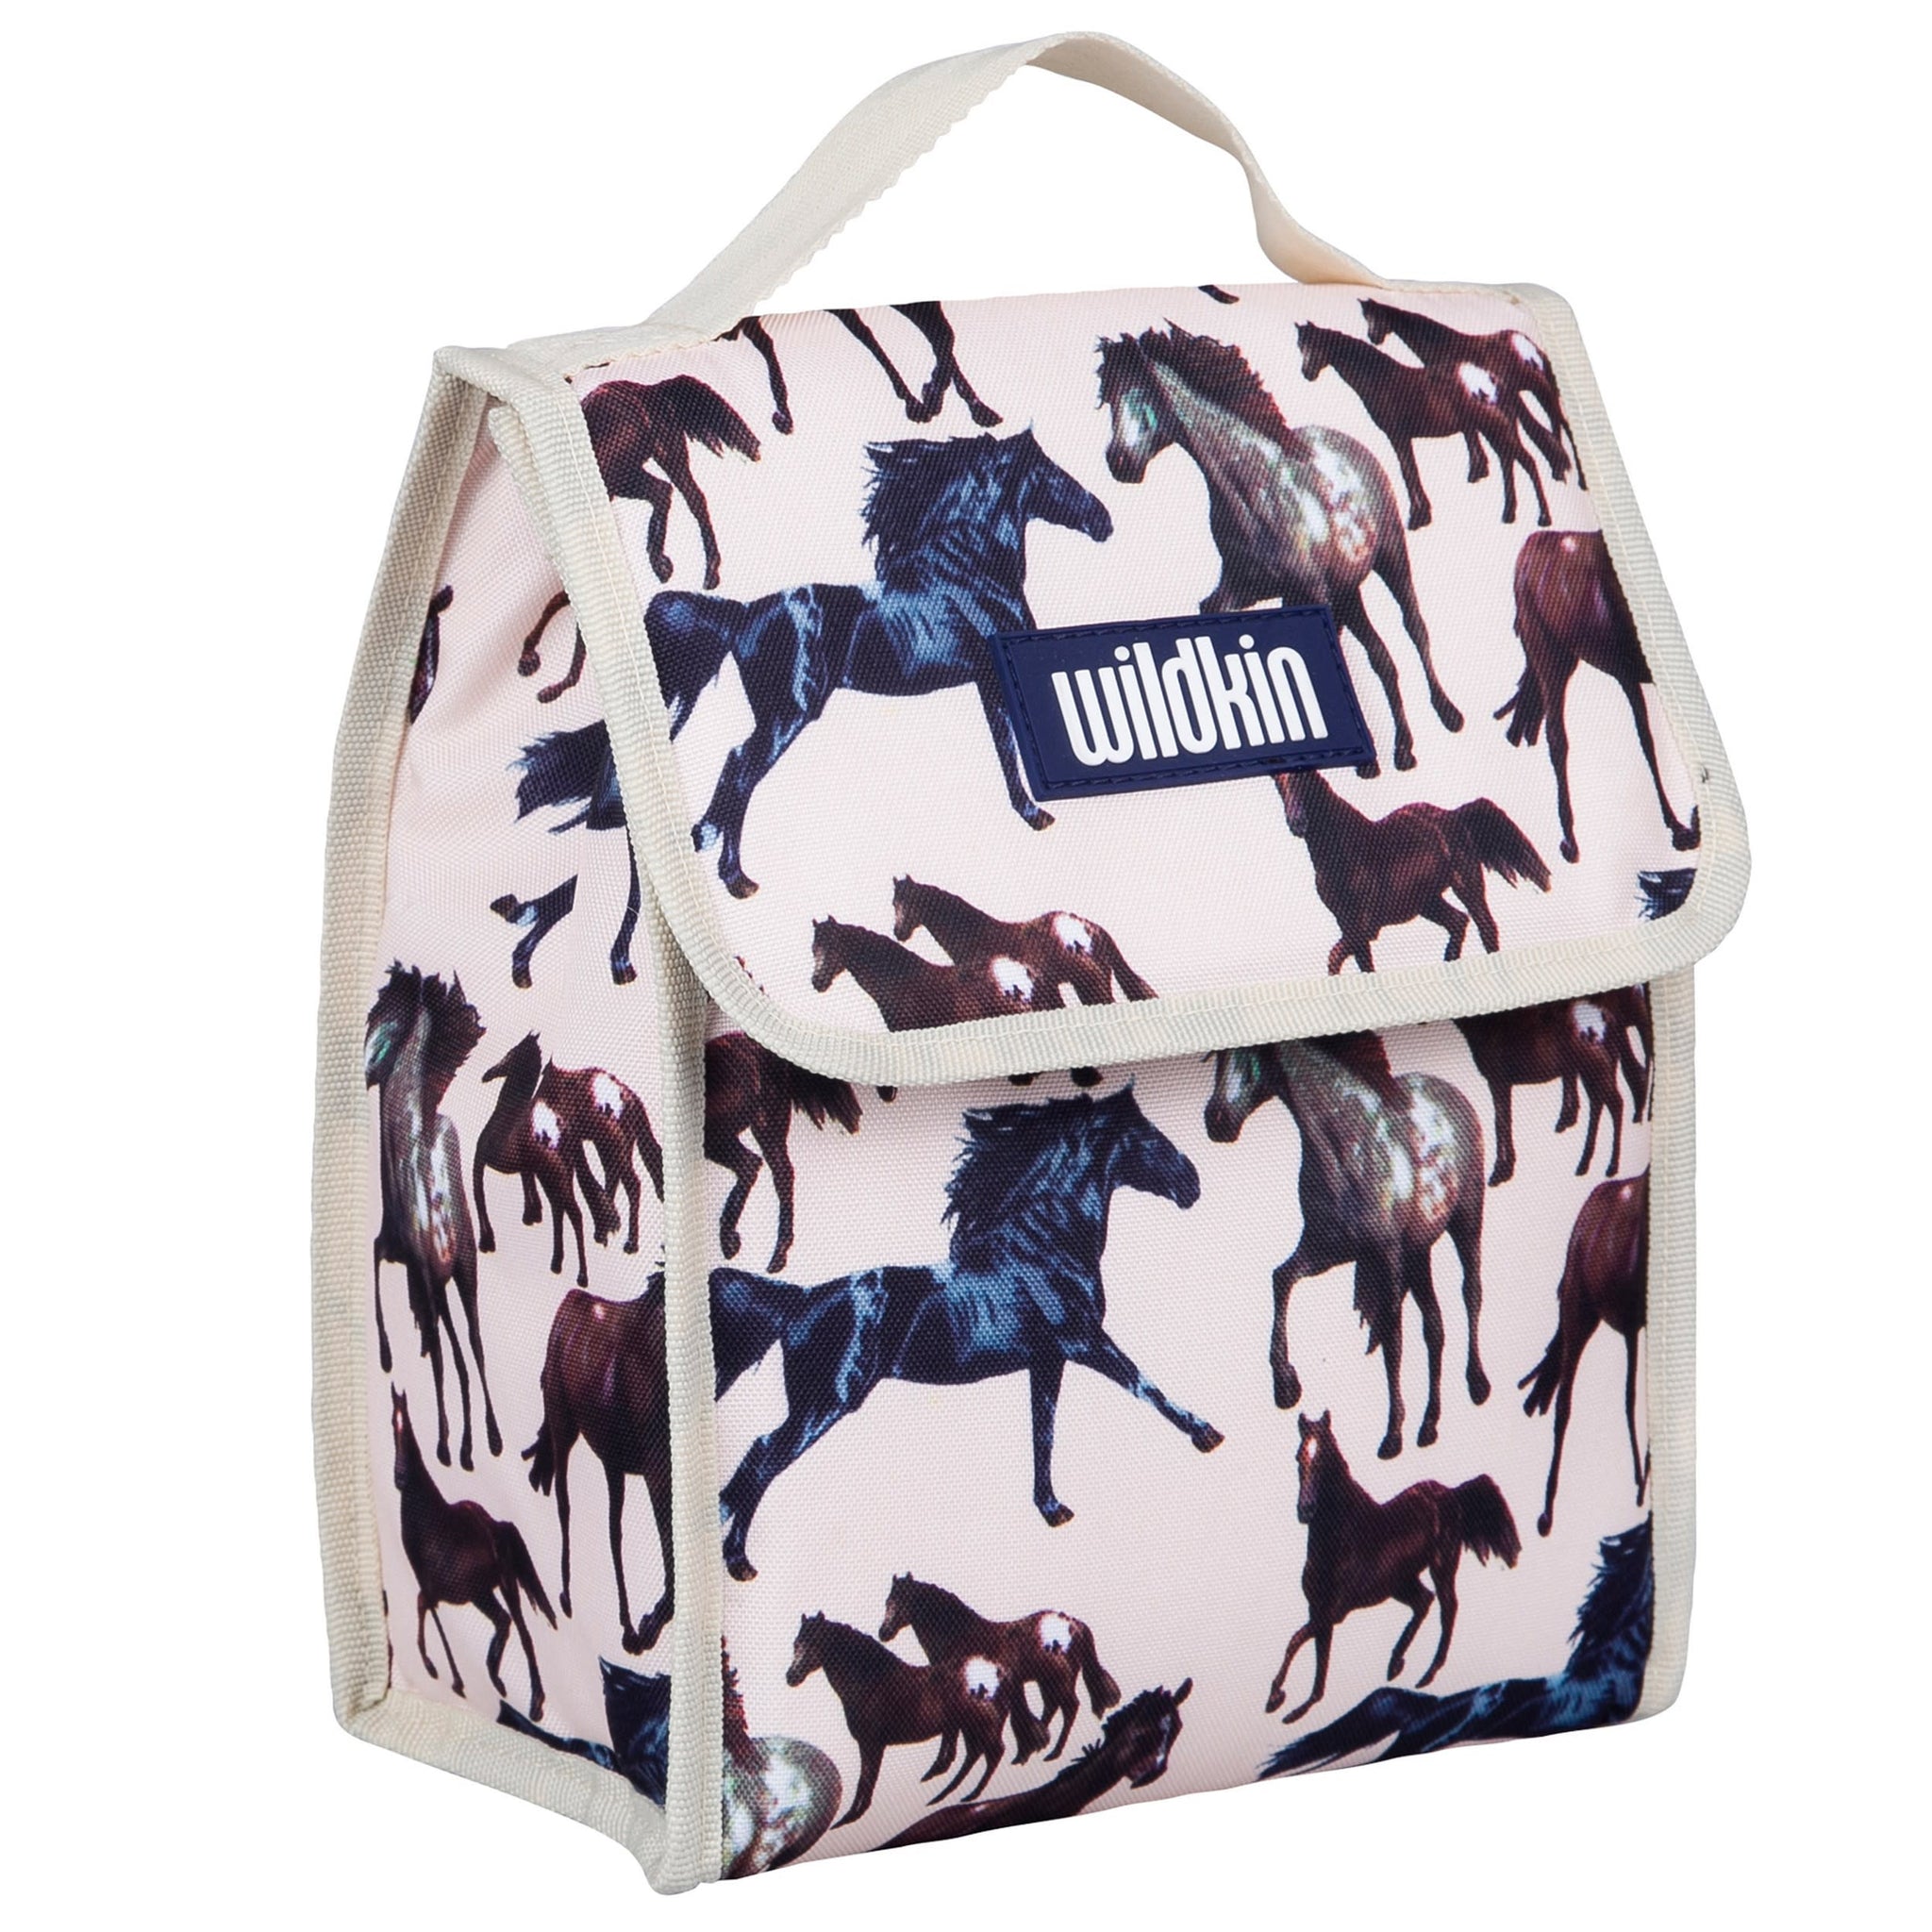 Wildkin Horses Lunch Box Gifts For The Rider Kids at Chagrin